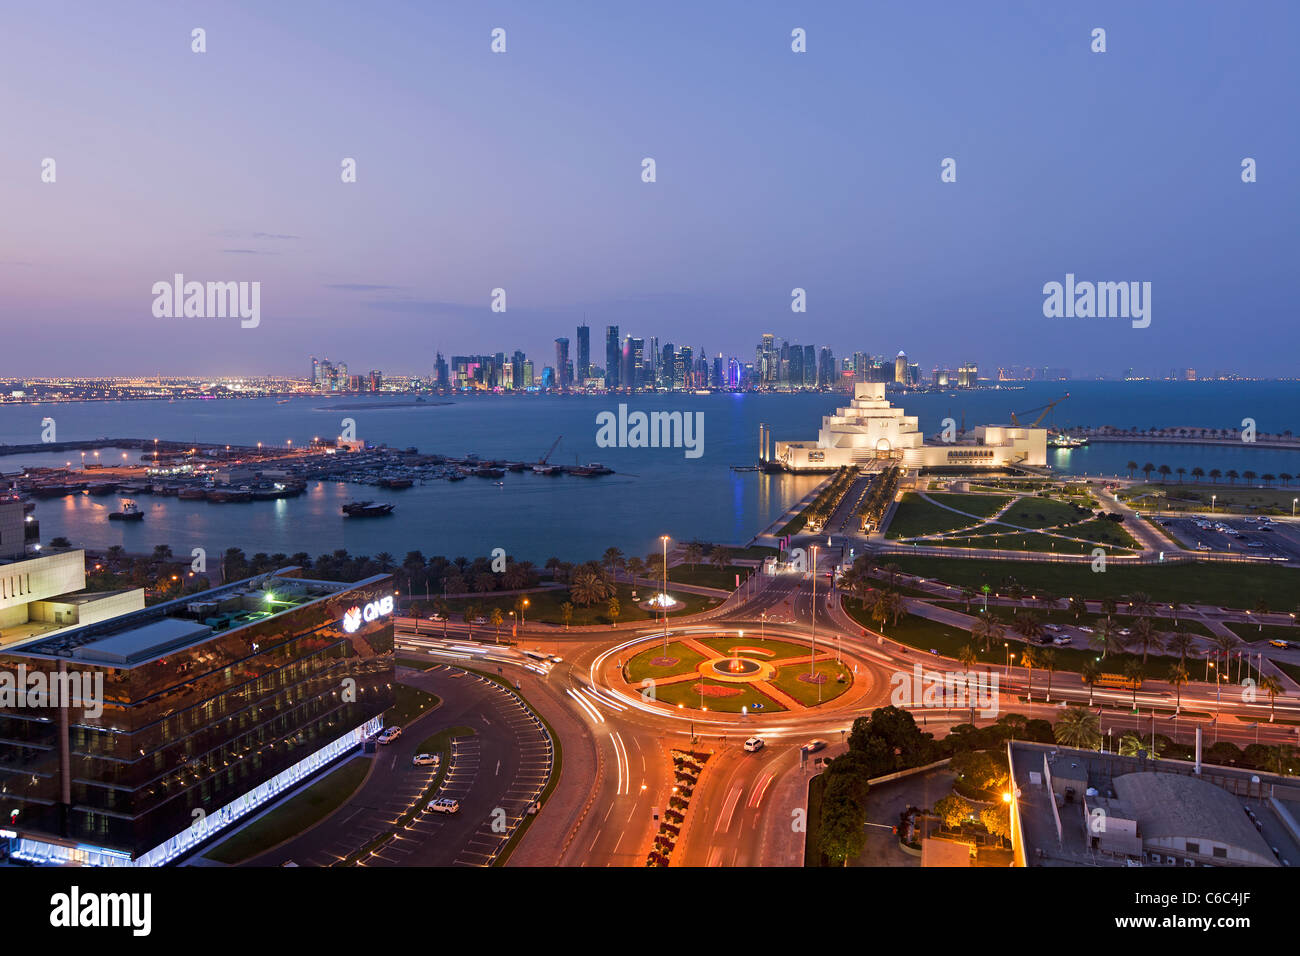 Qatar, Middle East, Arabian Peninsula, Doha, Elevated view over the Museum of Islamic Art and the Dhow harbour Stock Photo